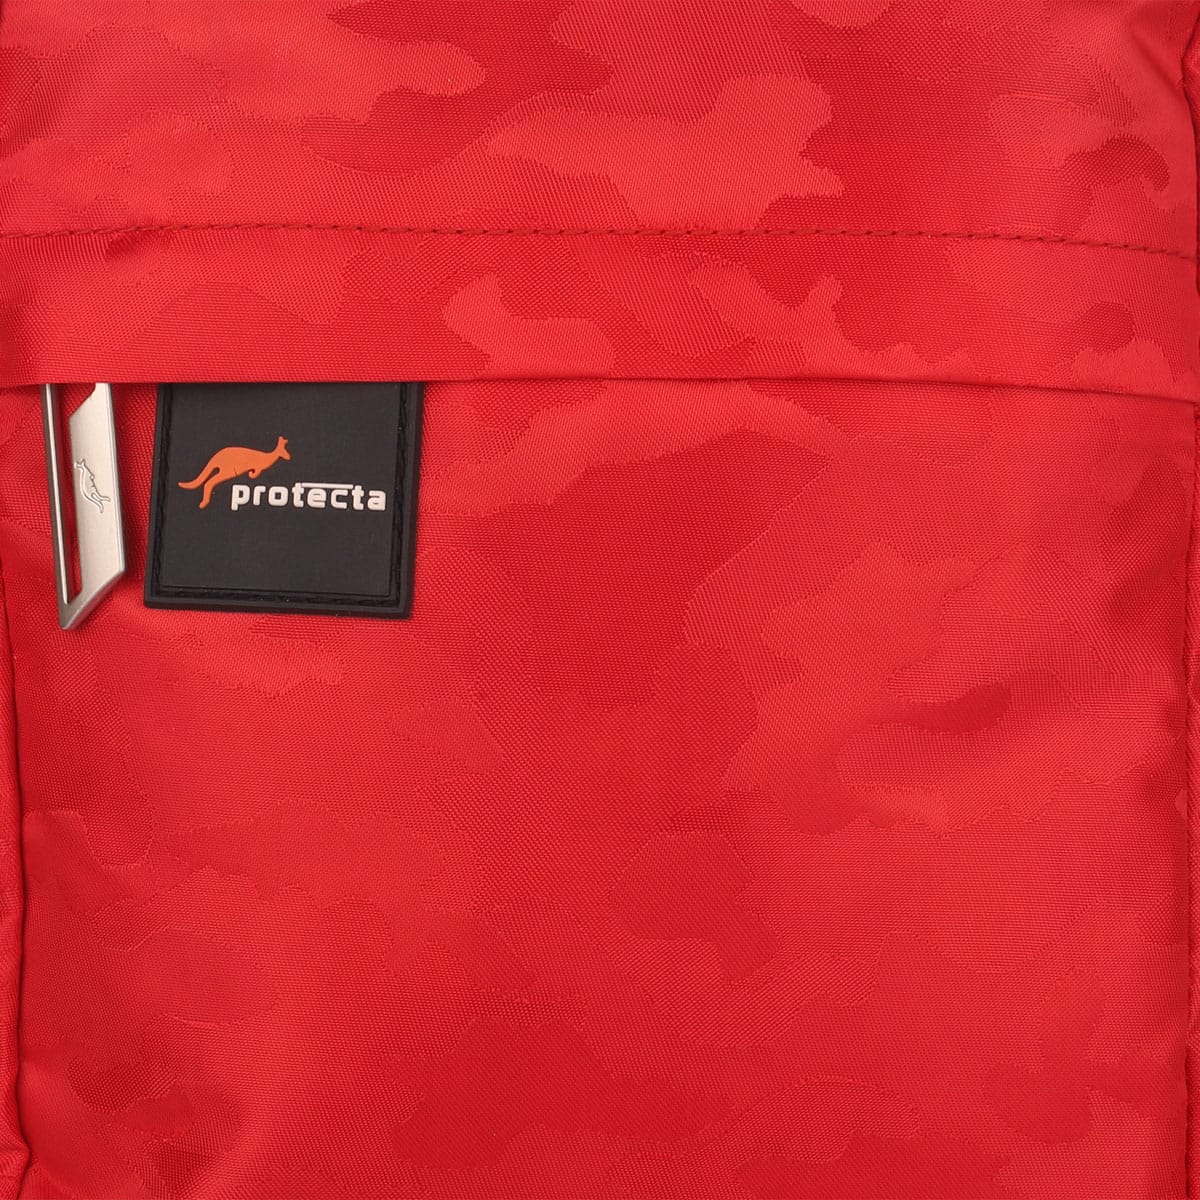 Red| Protecta Camo Unisex Sling Bag-6